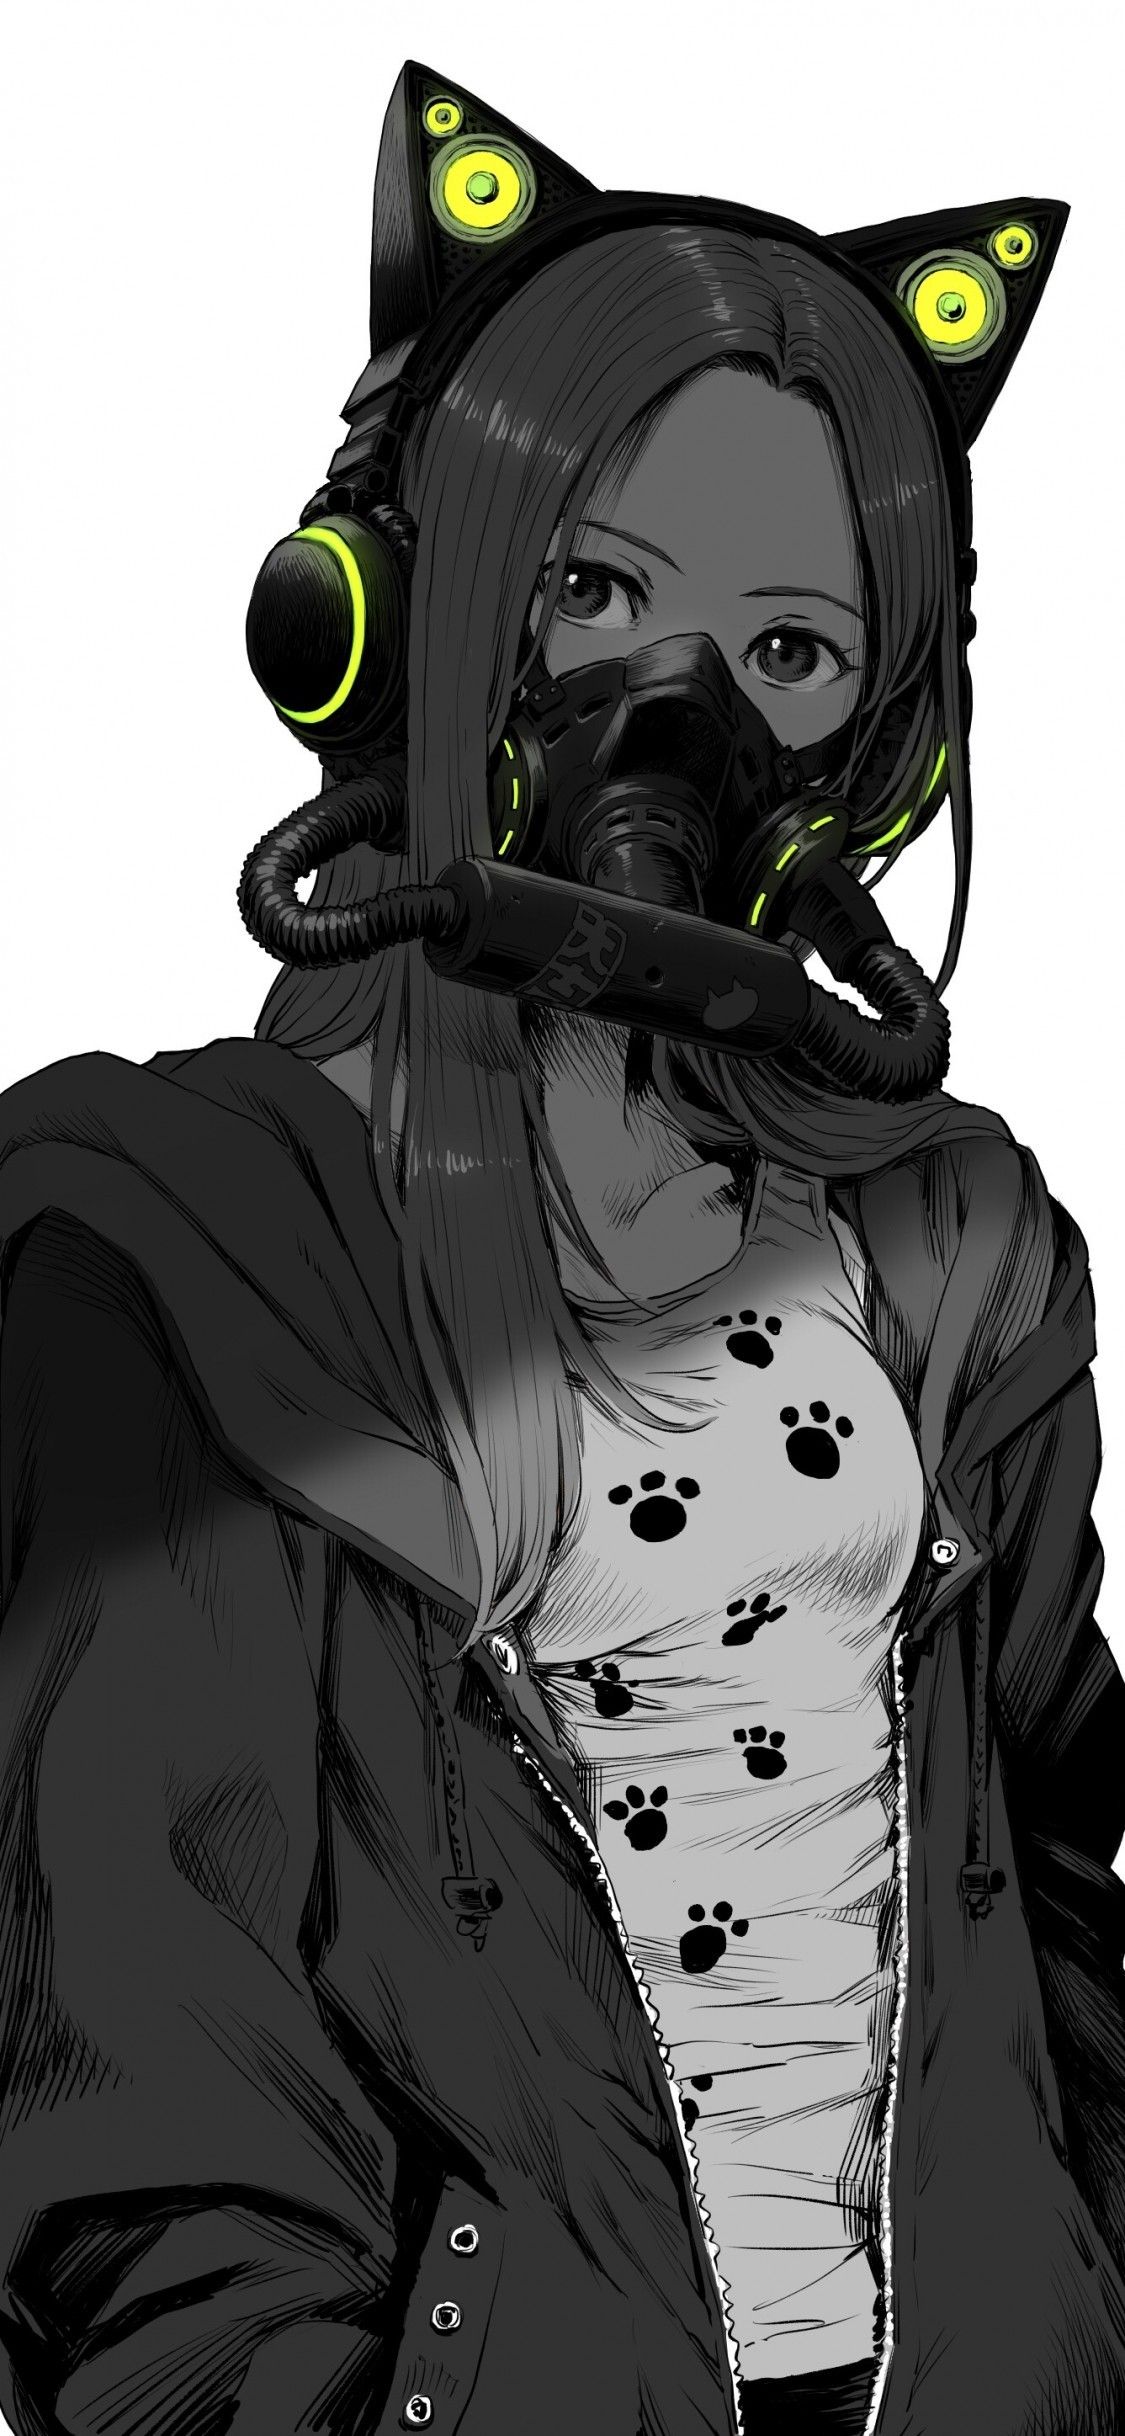 Download 1125x2436 Anime Girl, Mask, Jacket, Black And White